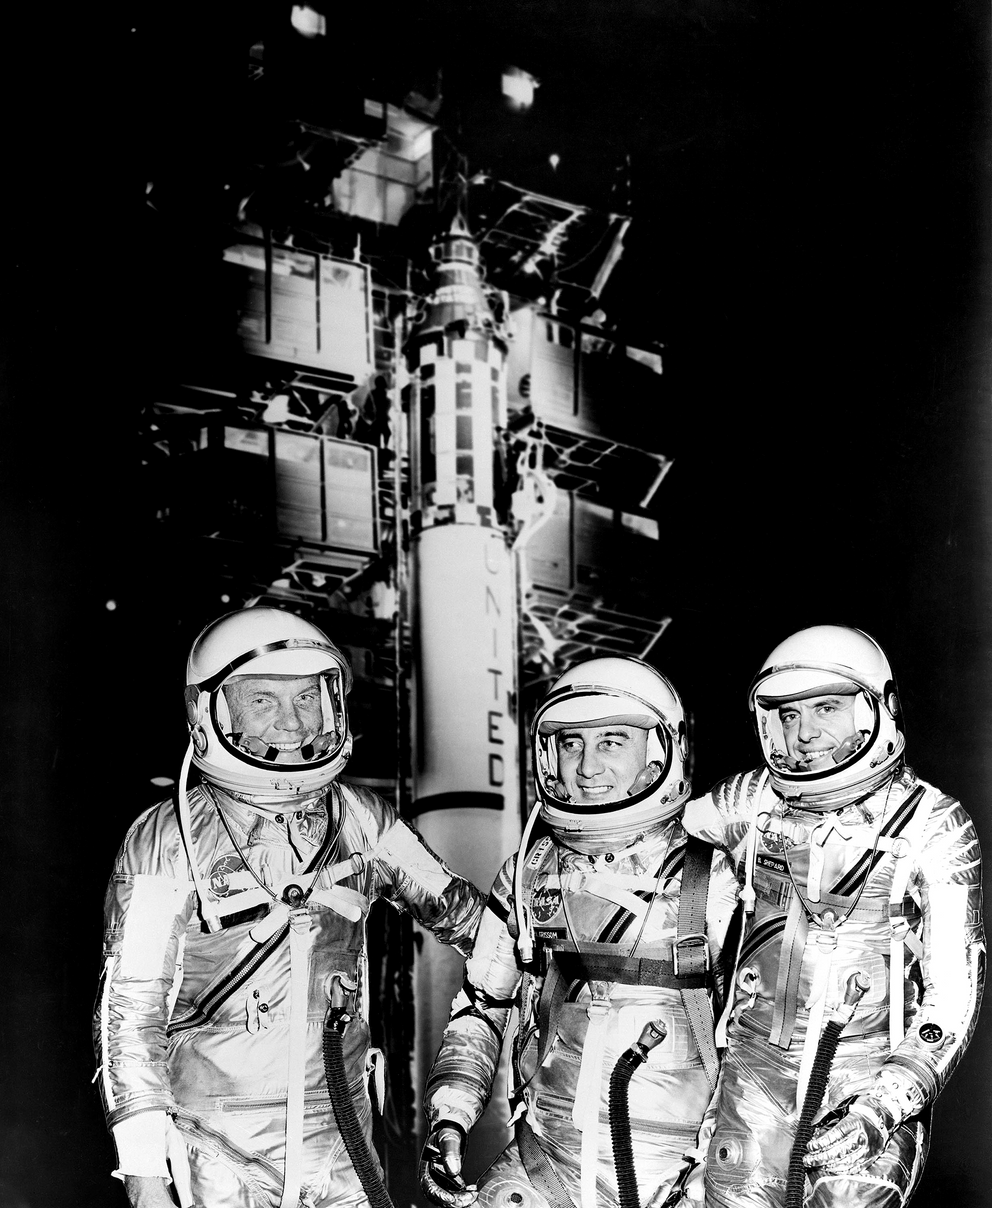 The image shows a Redstone rocket at the launch pad, with three space-suit-wearing astronauts in the foreground.